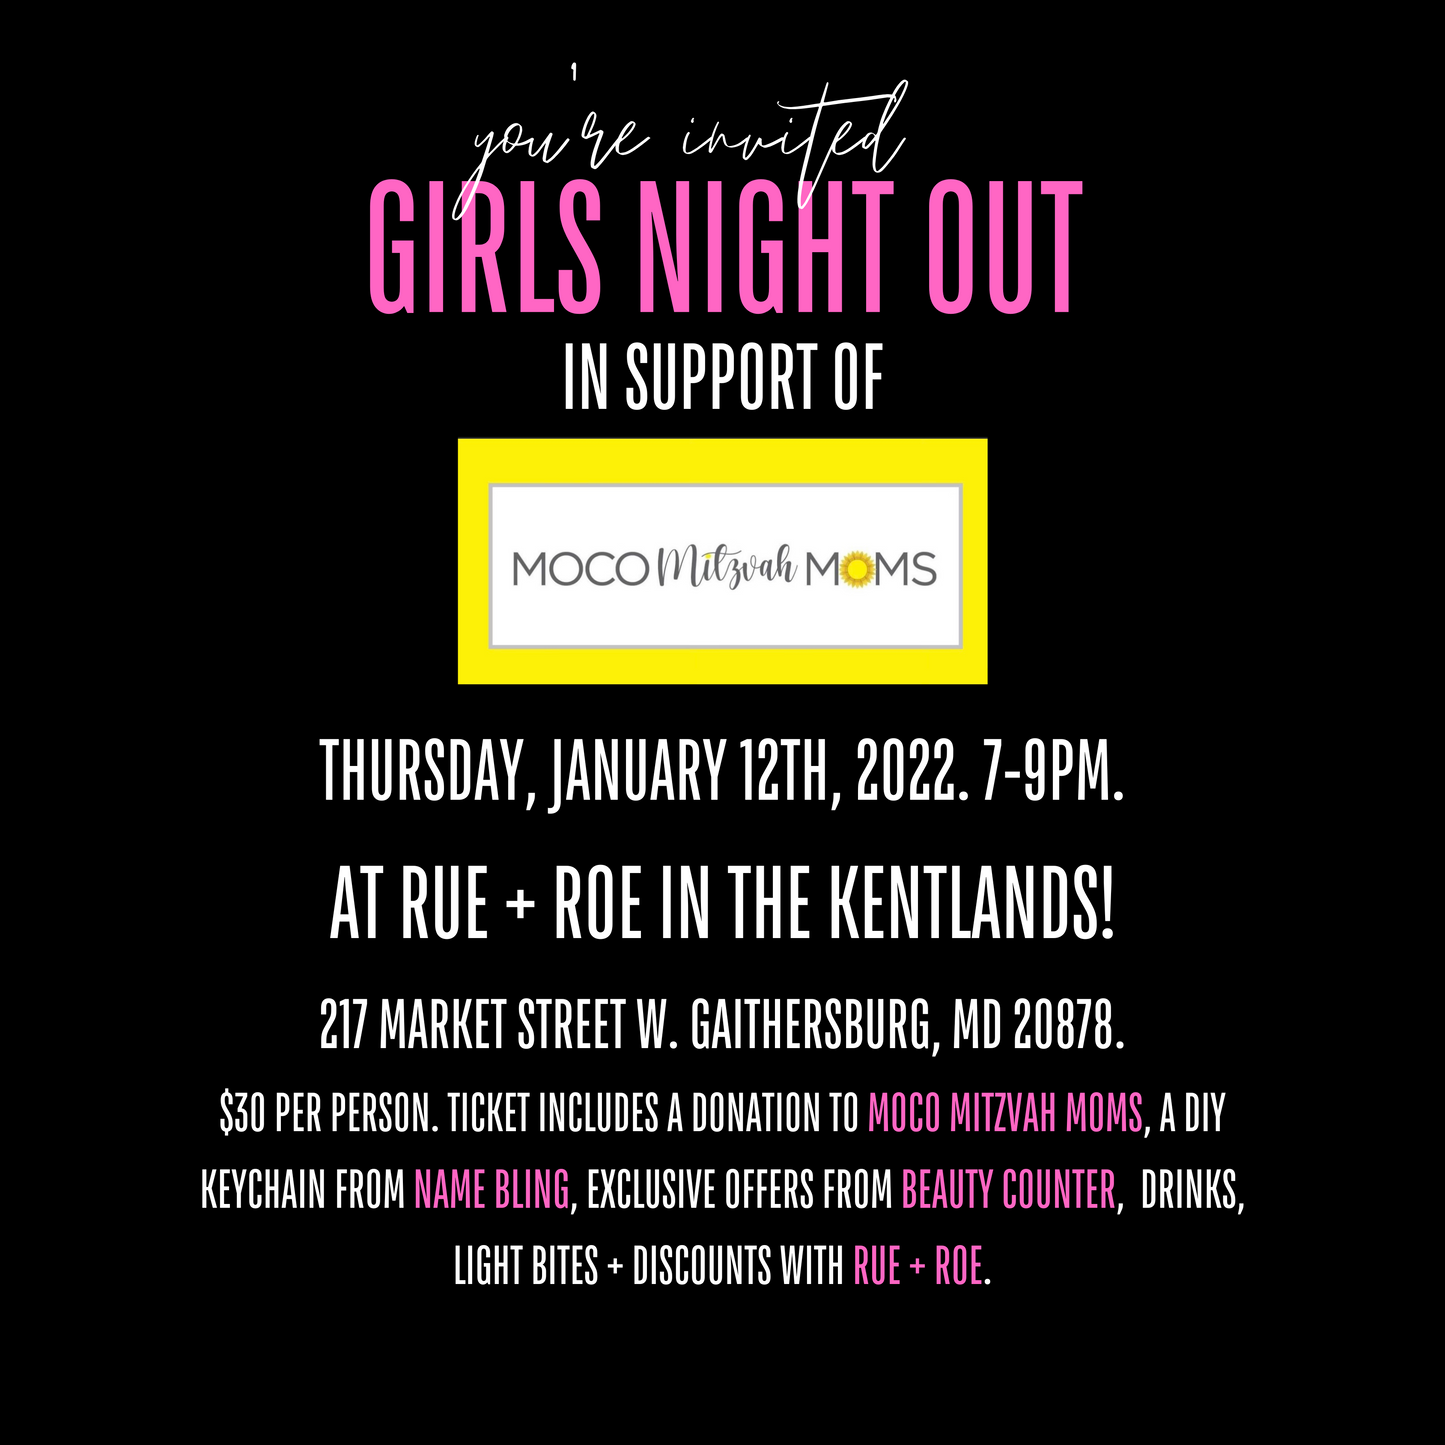 Girl's Night Out for MOCO MITZVAH MOMS!